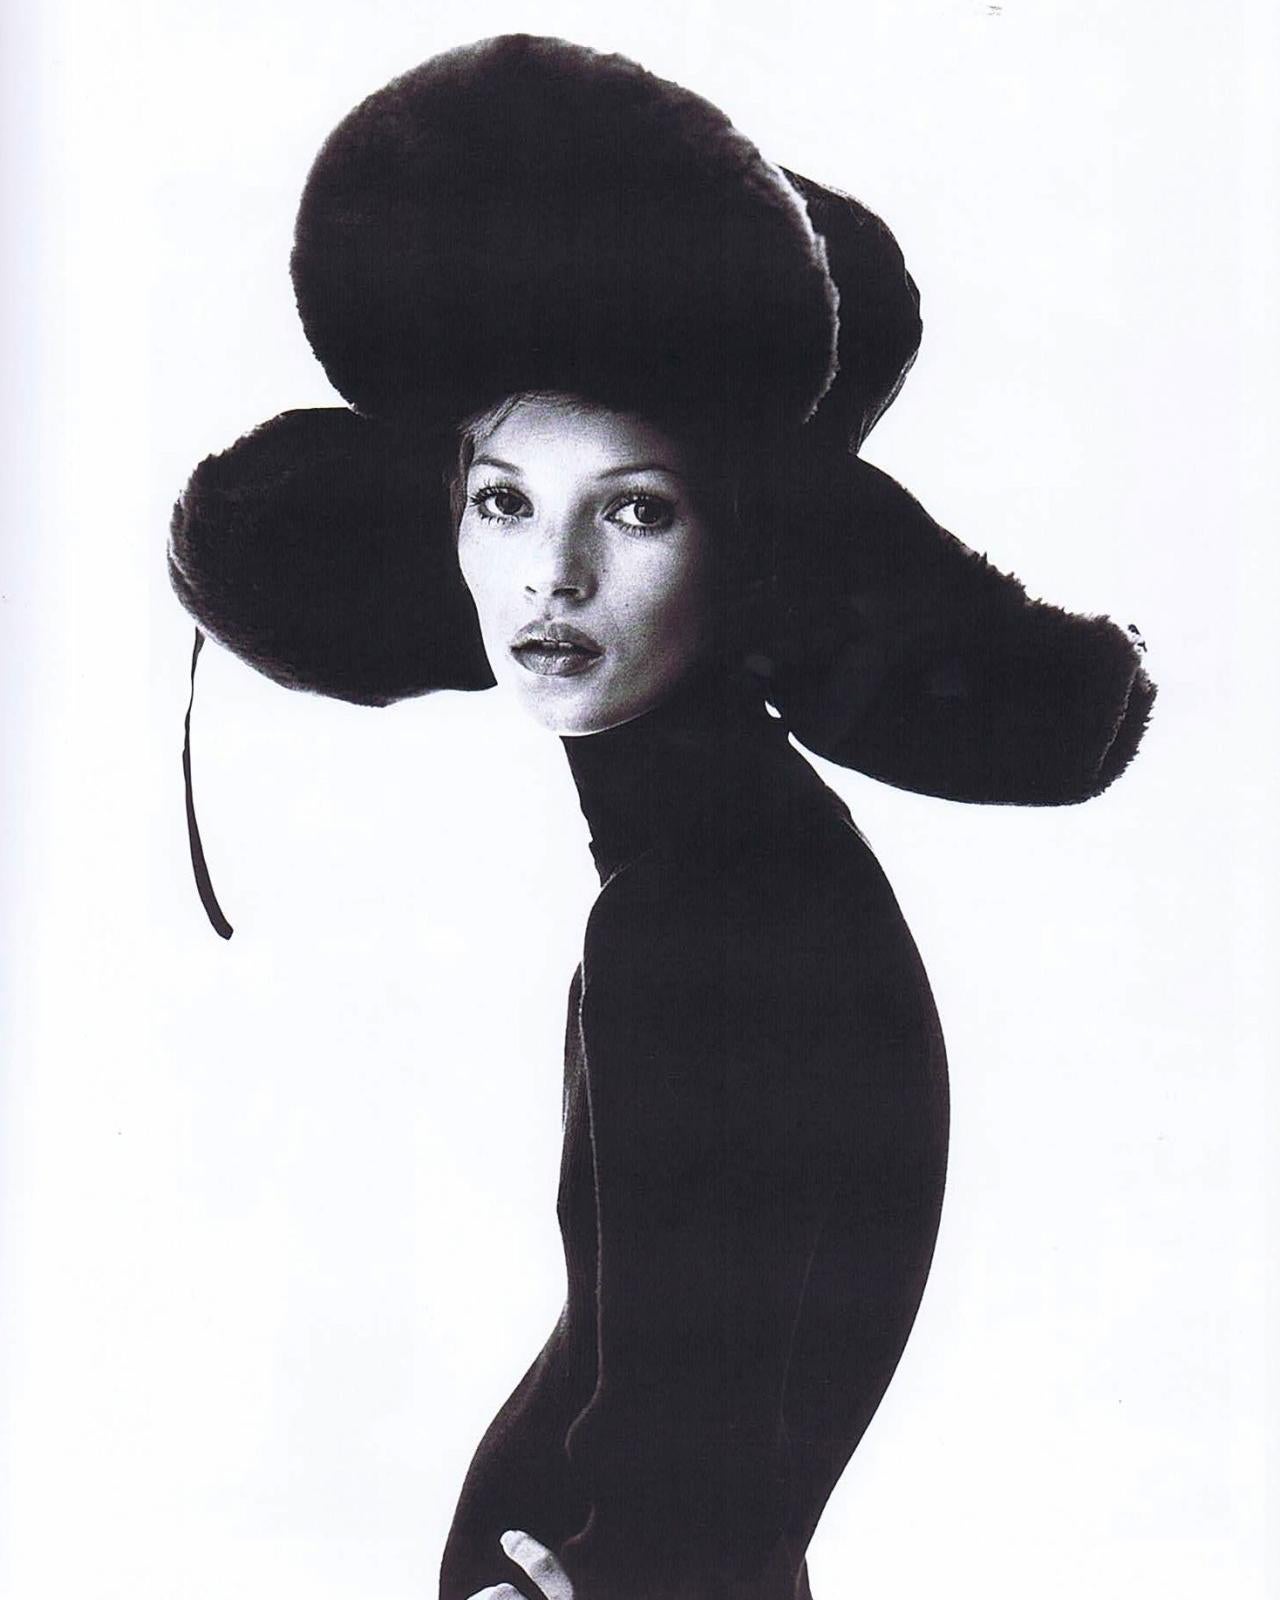 Jean Paul Gaultier black puffer trapper hat. Oversized proportions, metal buckle fastening and padding throughout.

Fall-Winter 1993